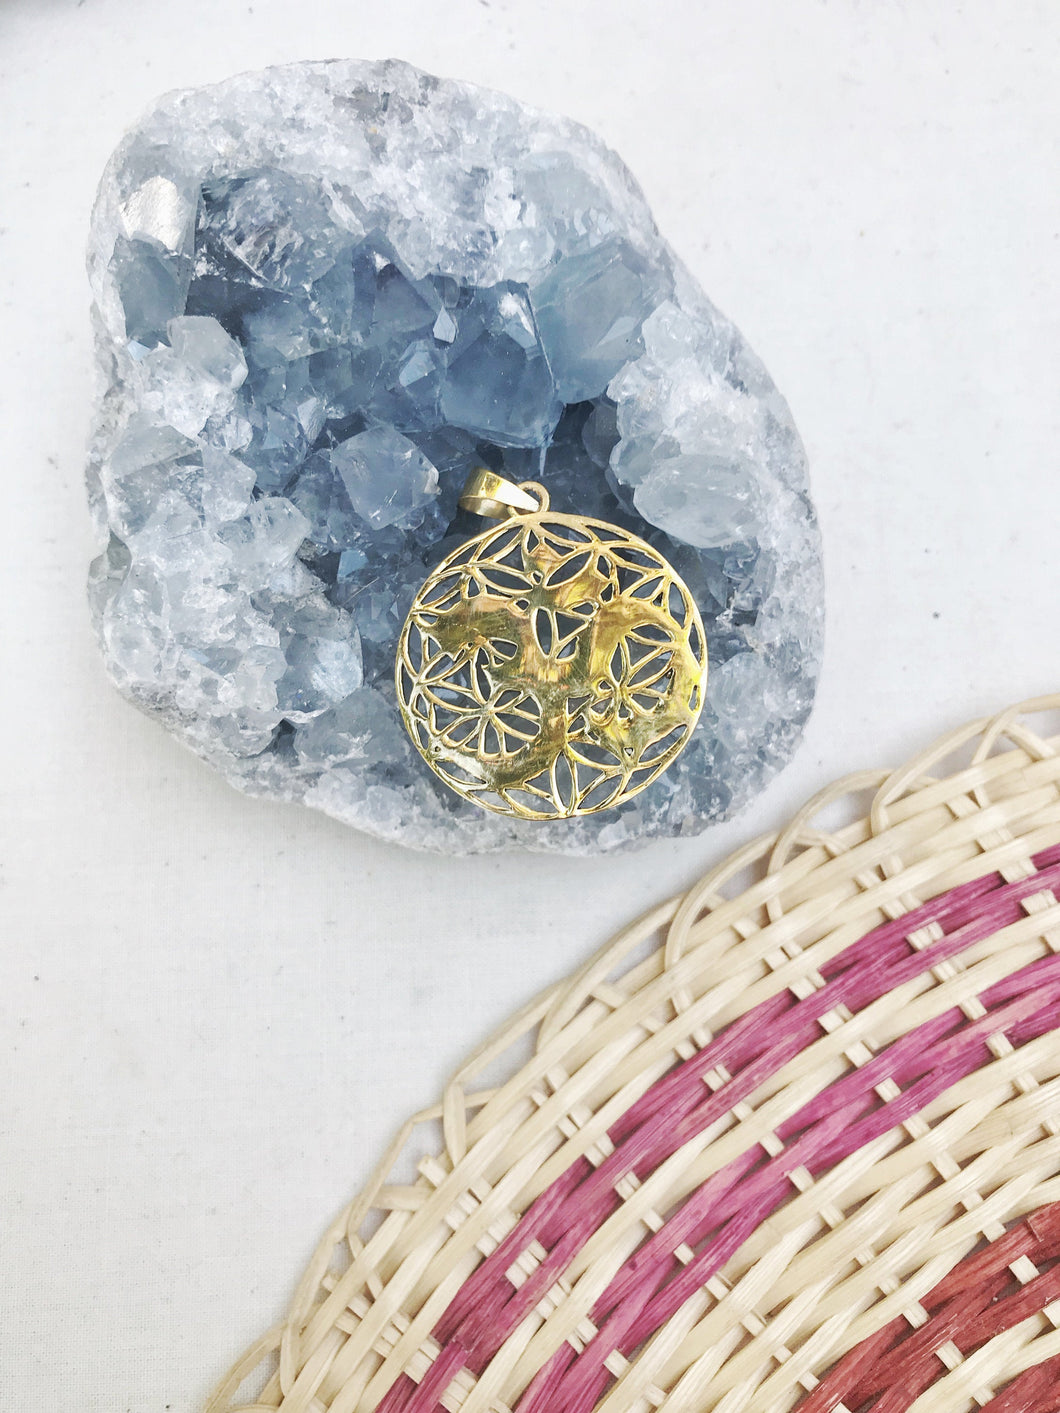 OM Flower of Life Pendant Necklace | With or Without Chain